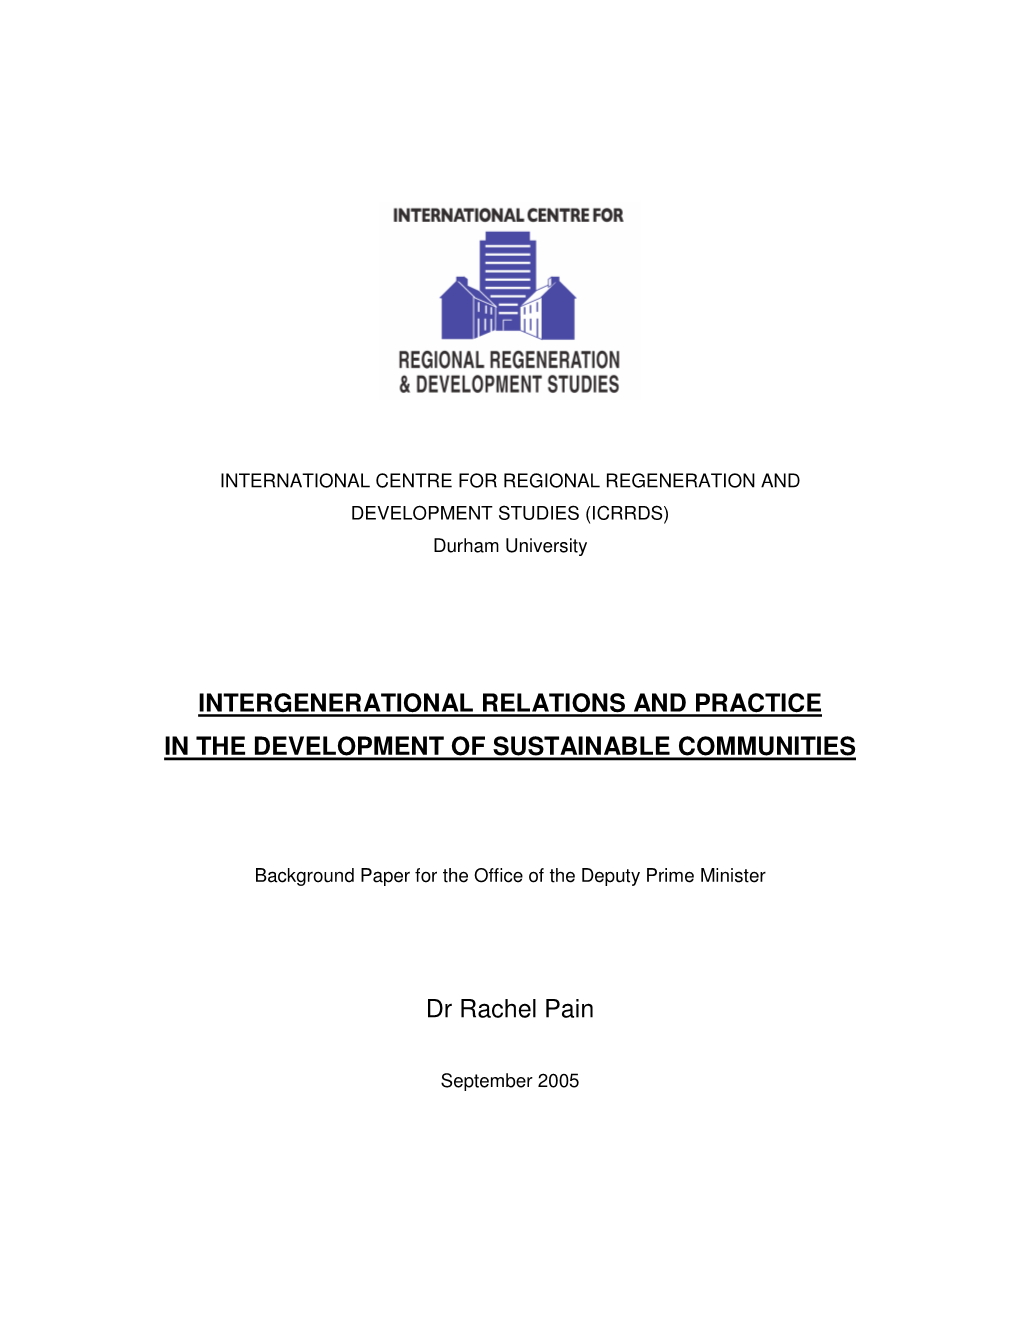 Intergenerational Relations and Practice in the Development of Sustainable Communities